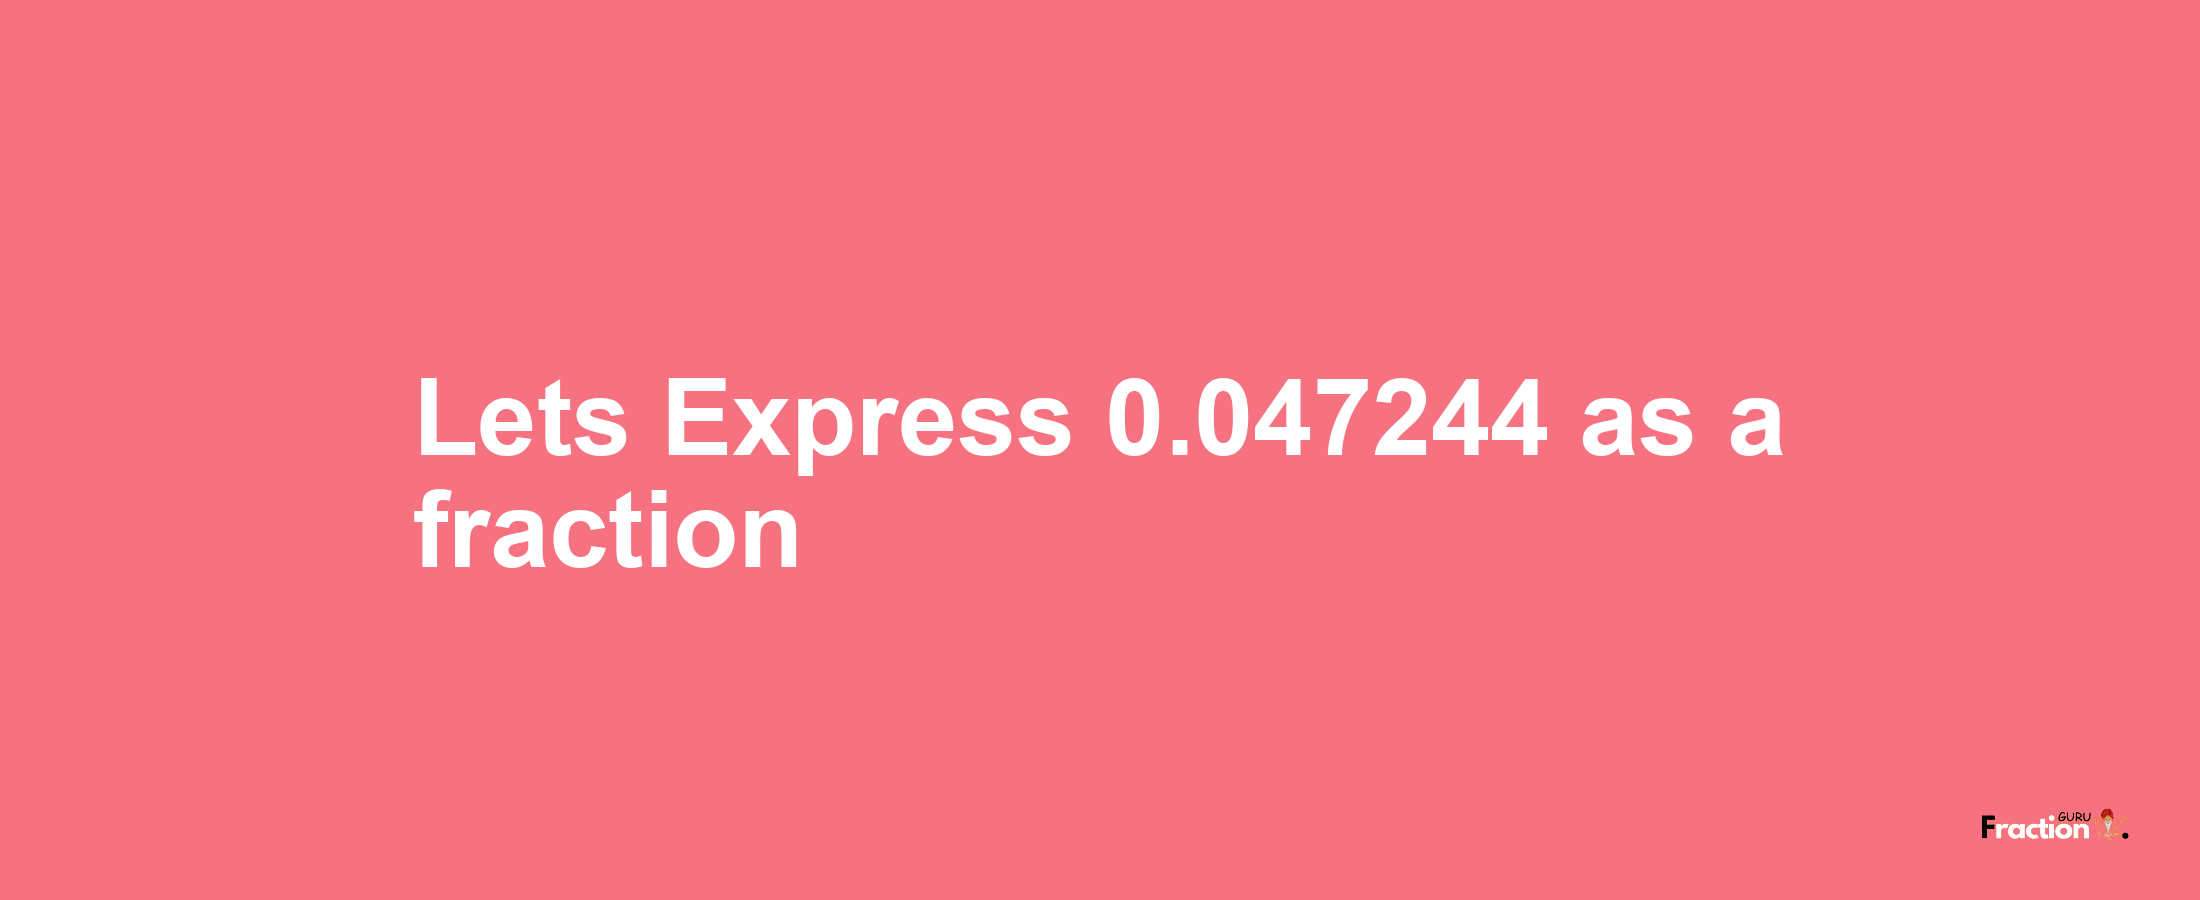 Lets Express 0.047244 as afraction